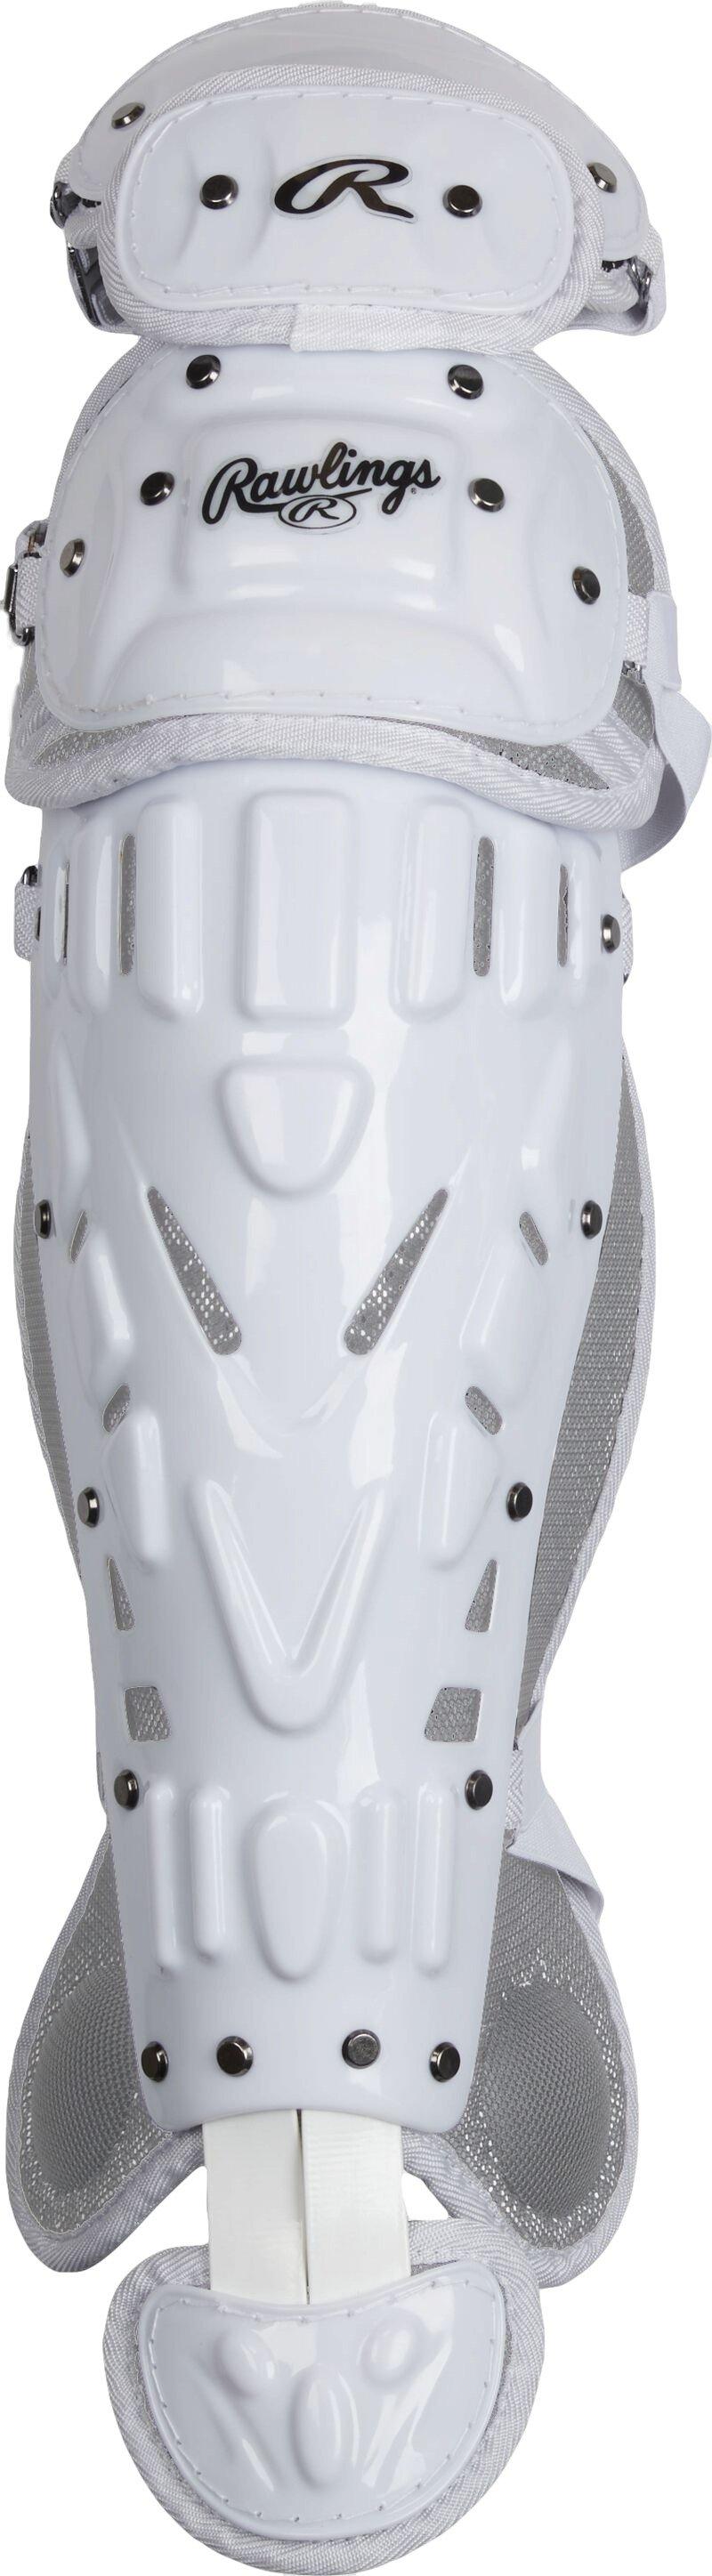 Rawlings Athletic Jockstrap with Cage Cup White